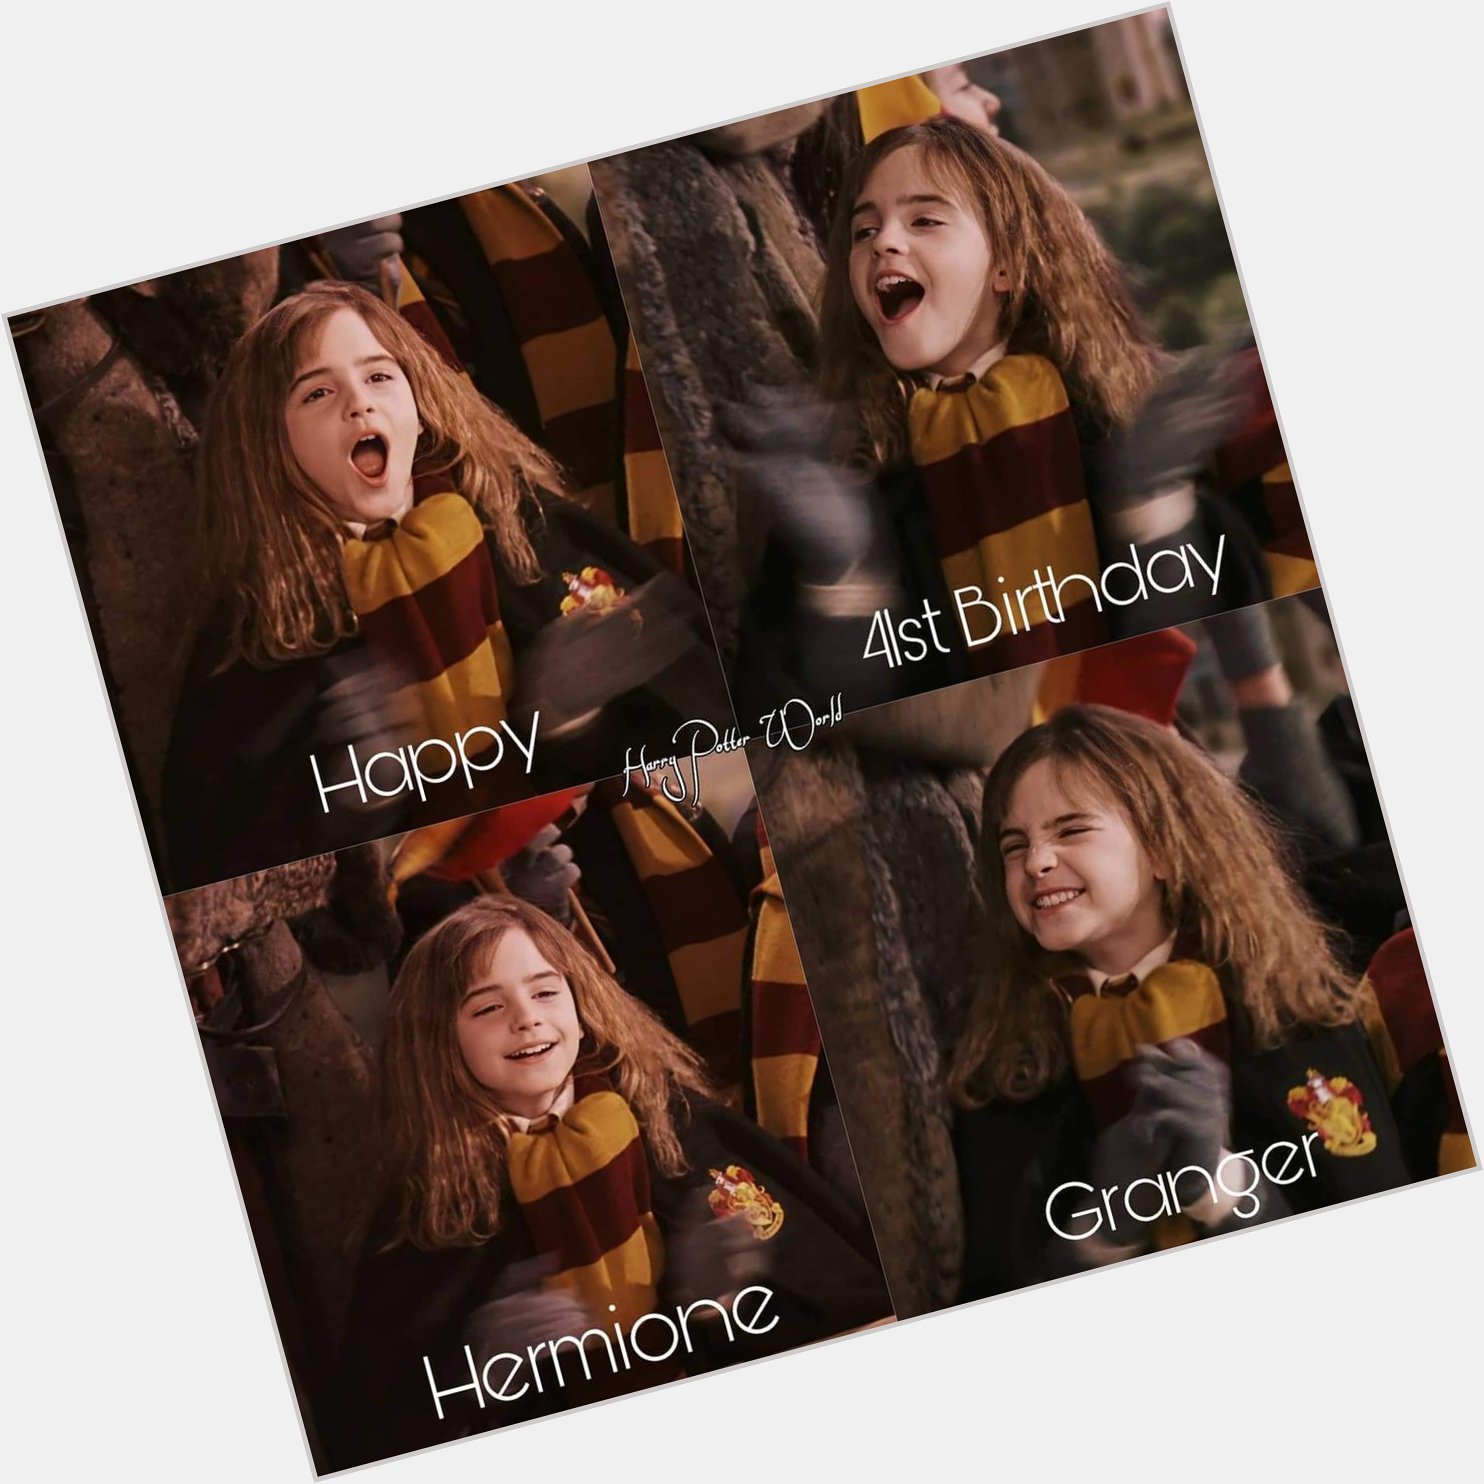 Happy birthday to the brightest witch of her age, Hermione Granger!  